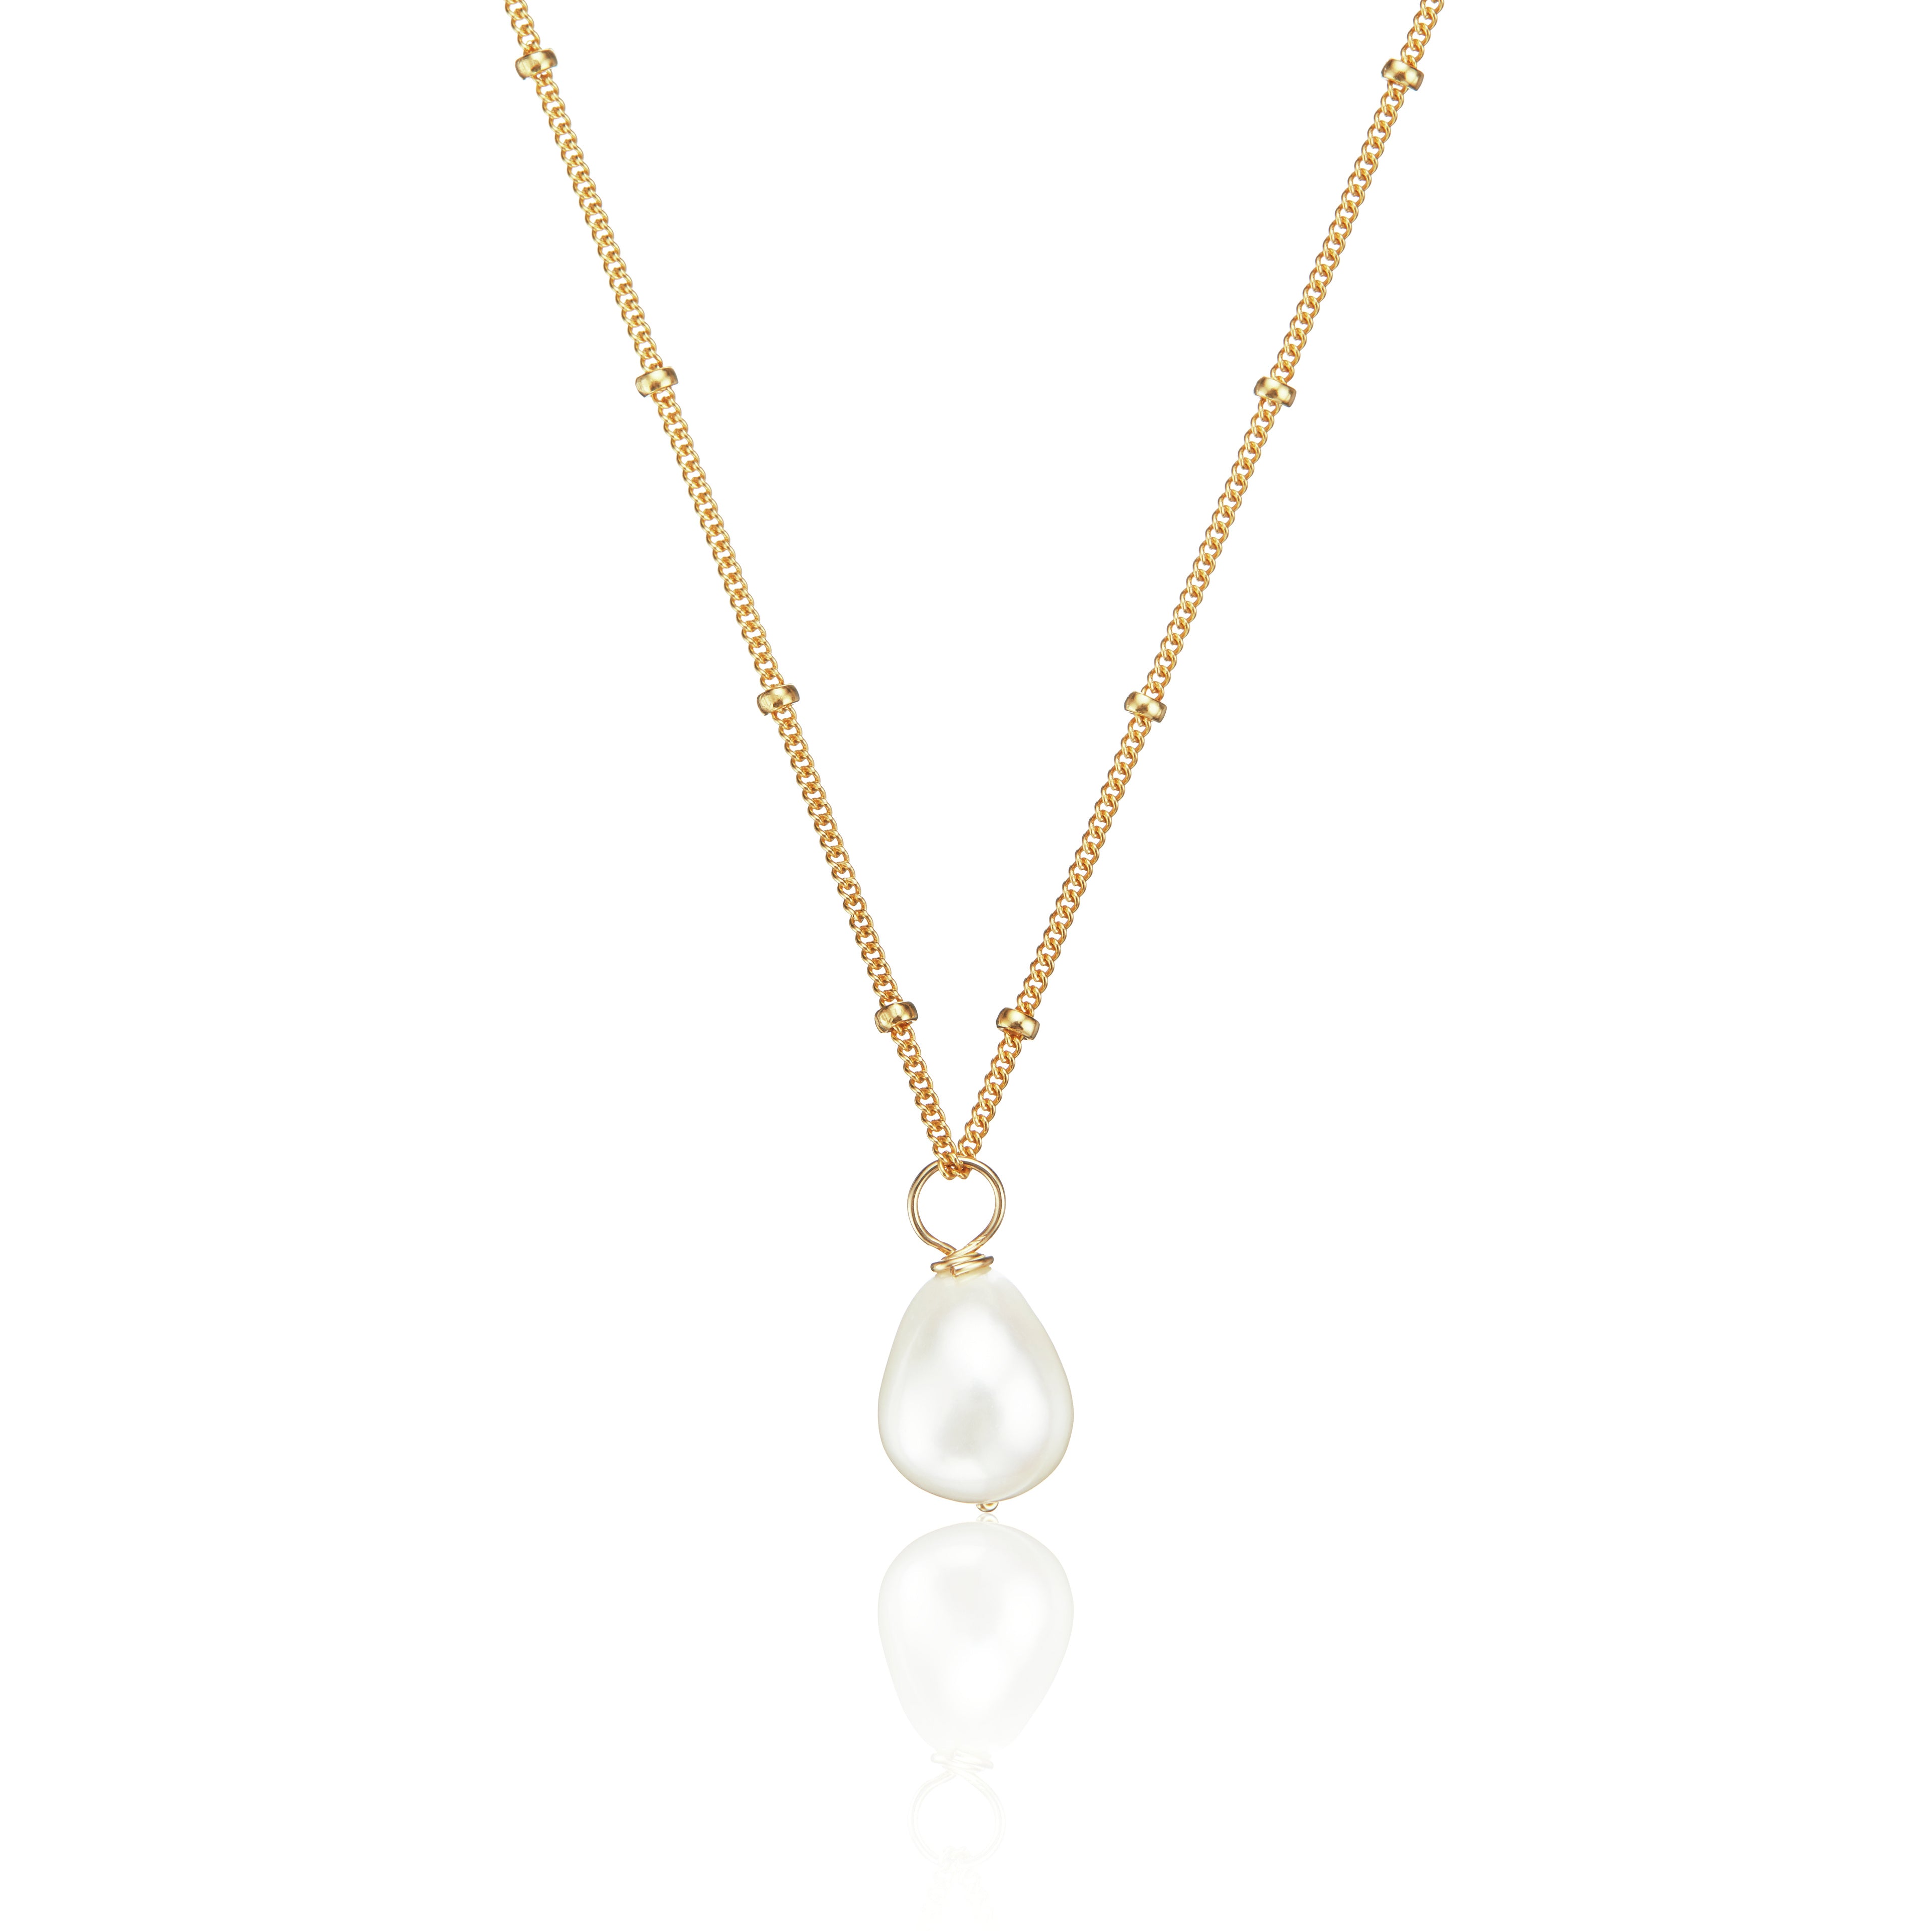 Gold large pearl satellite necklace on a white background